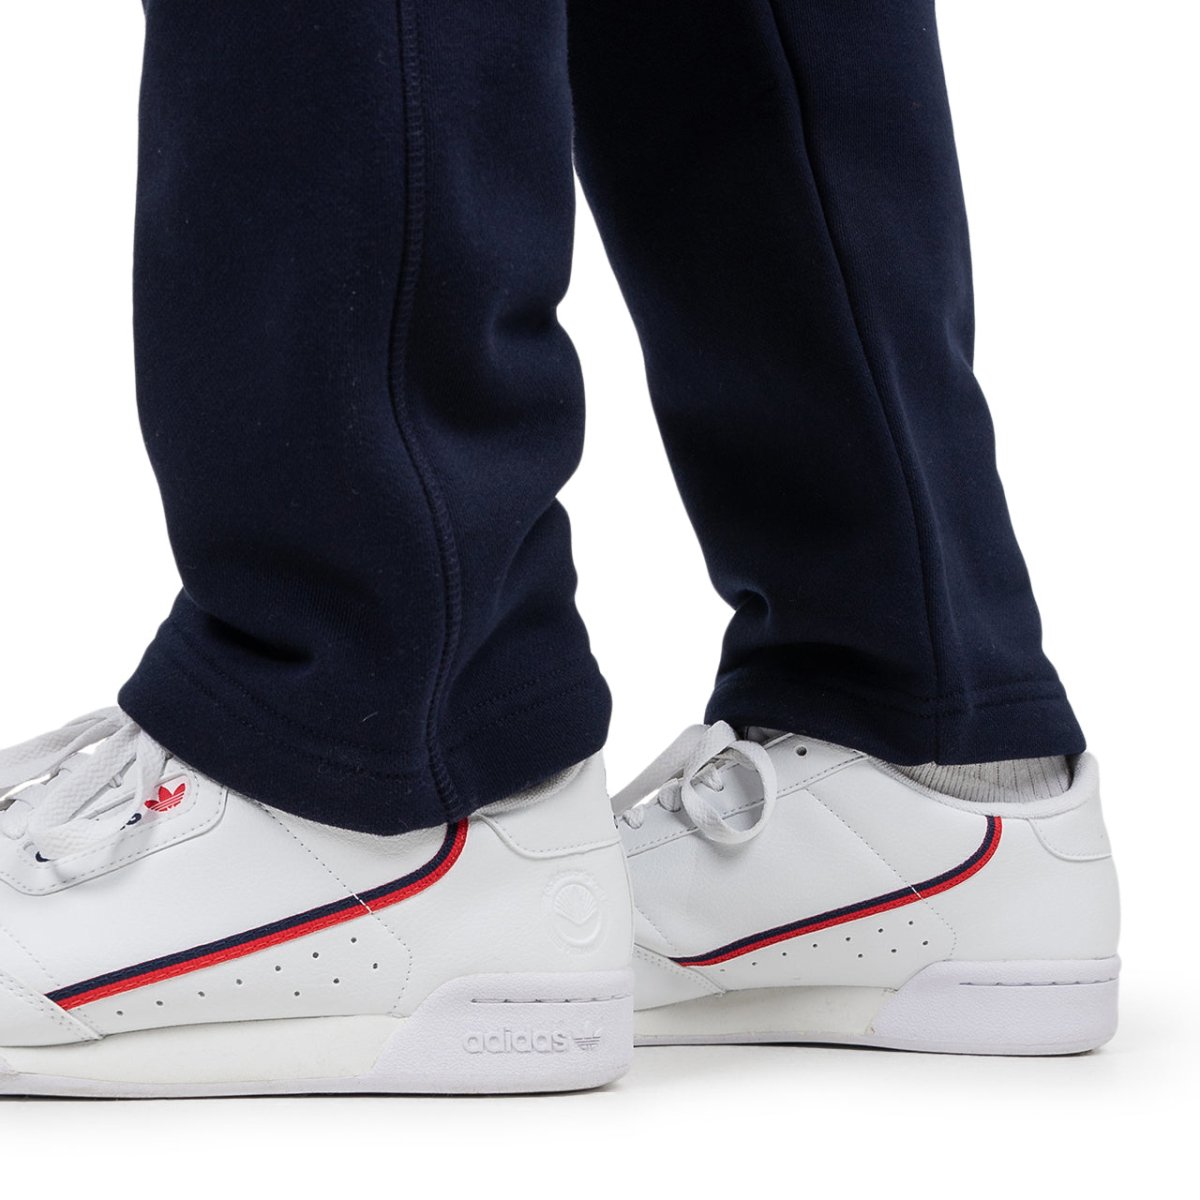 Norse Projects Falun Classic Sweatpant (Navy)  - Allike Store